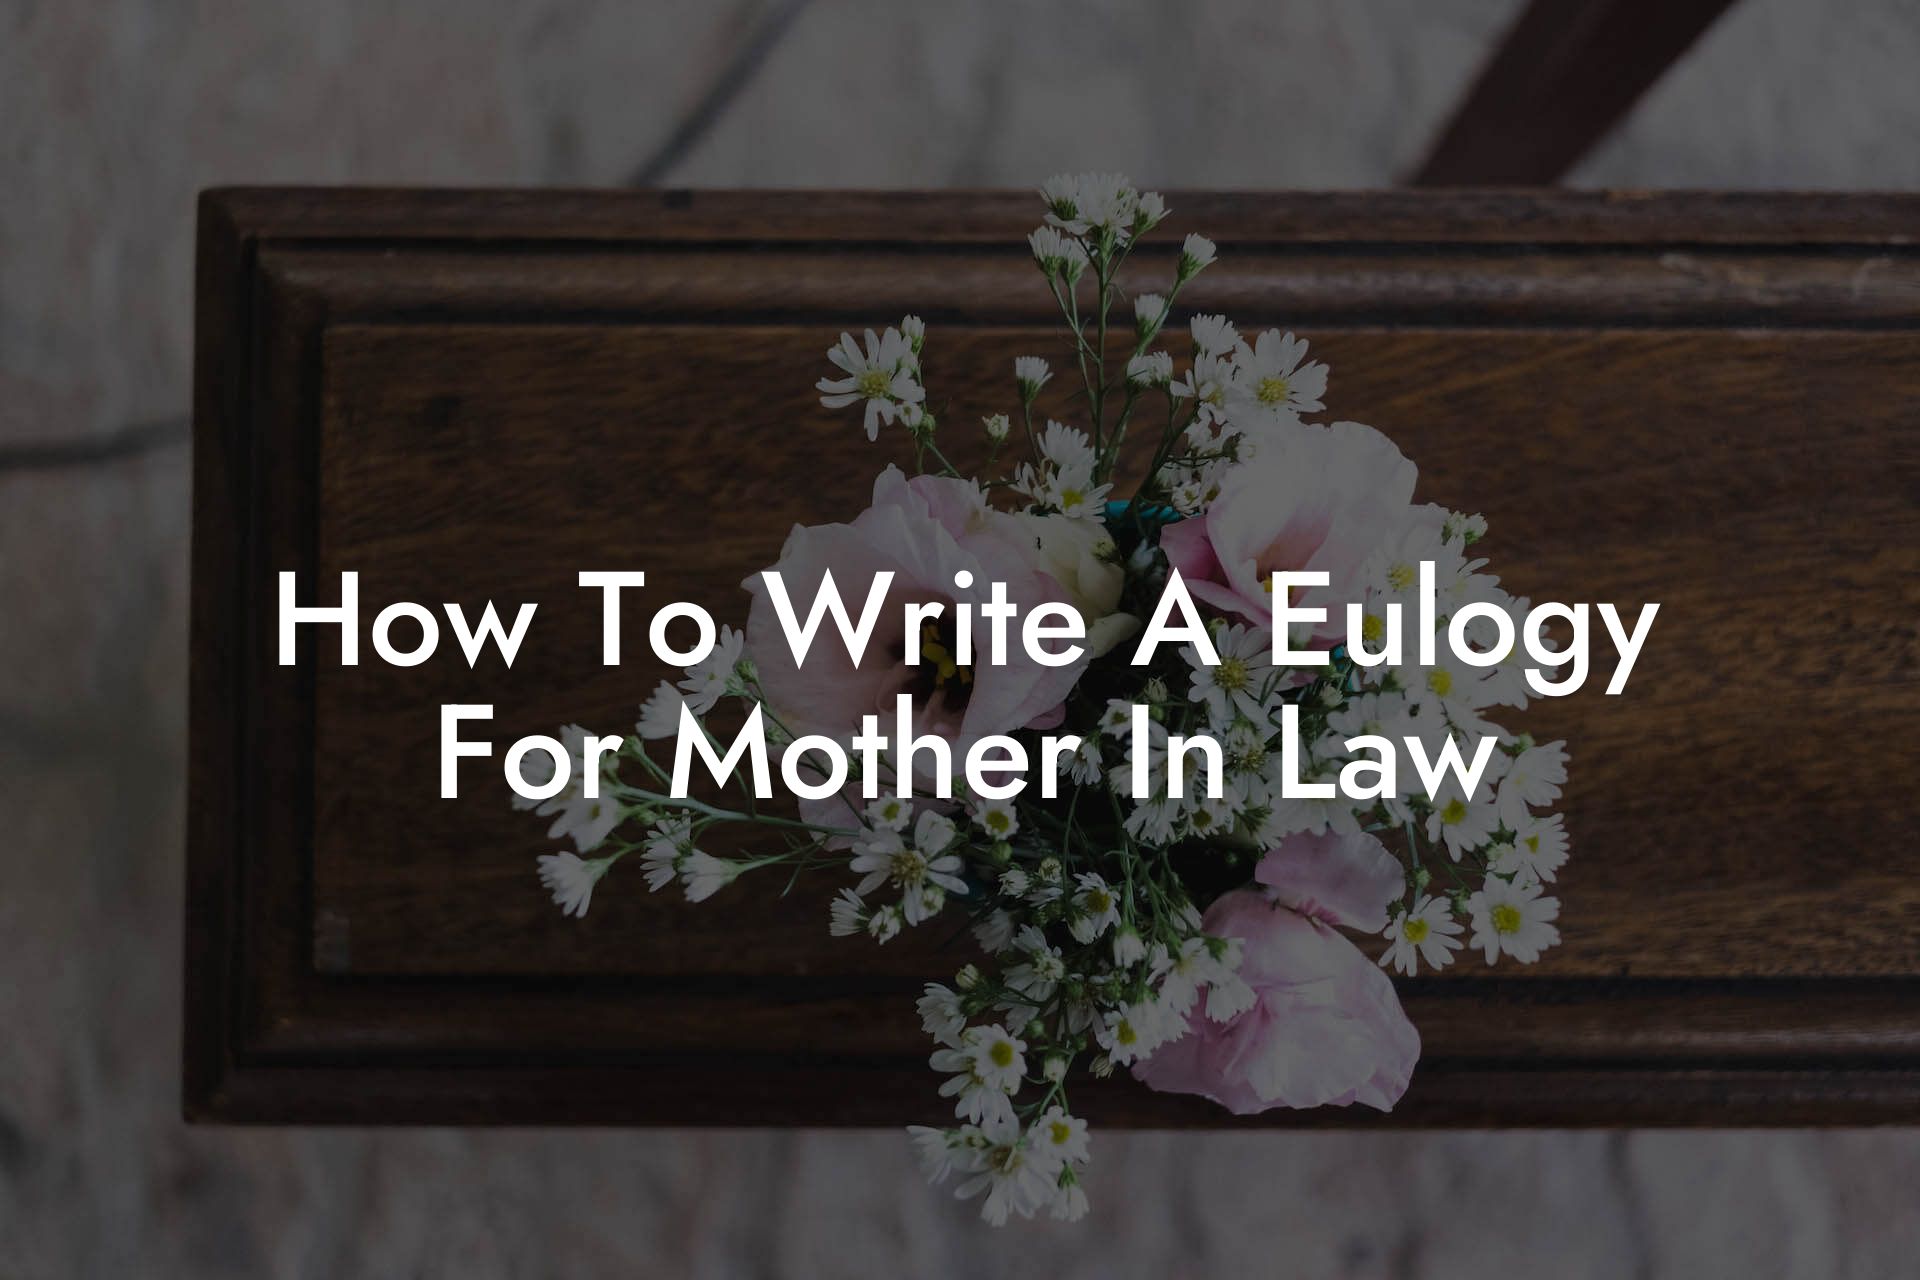 How To Write A Eulogy For Mother In Law